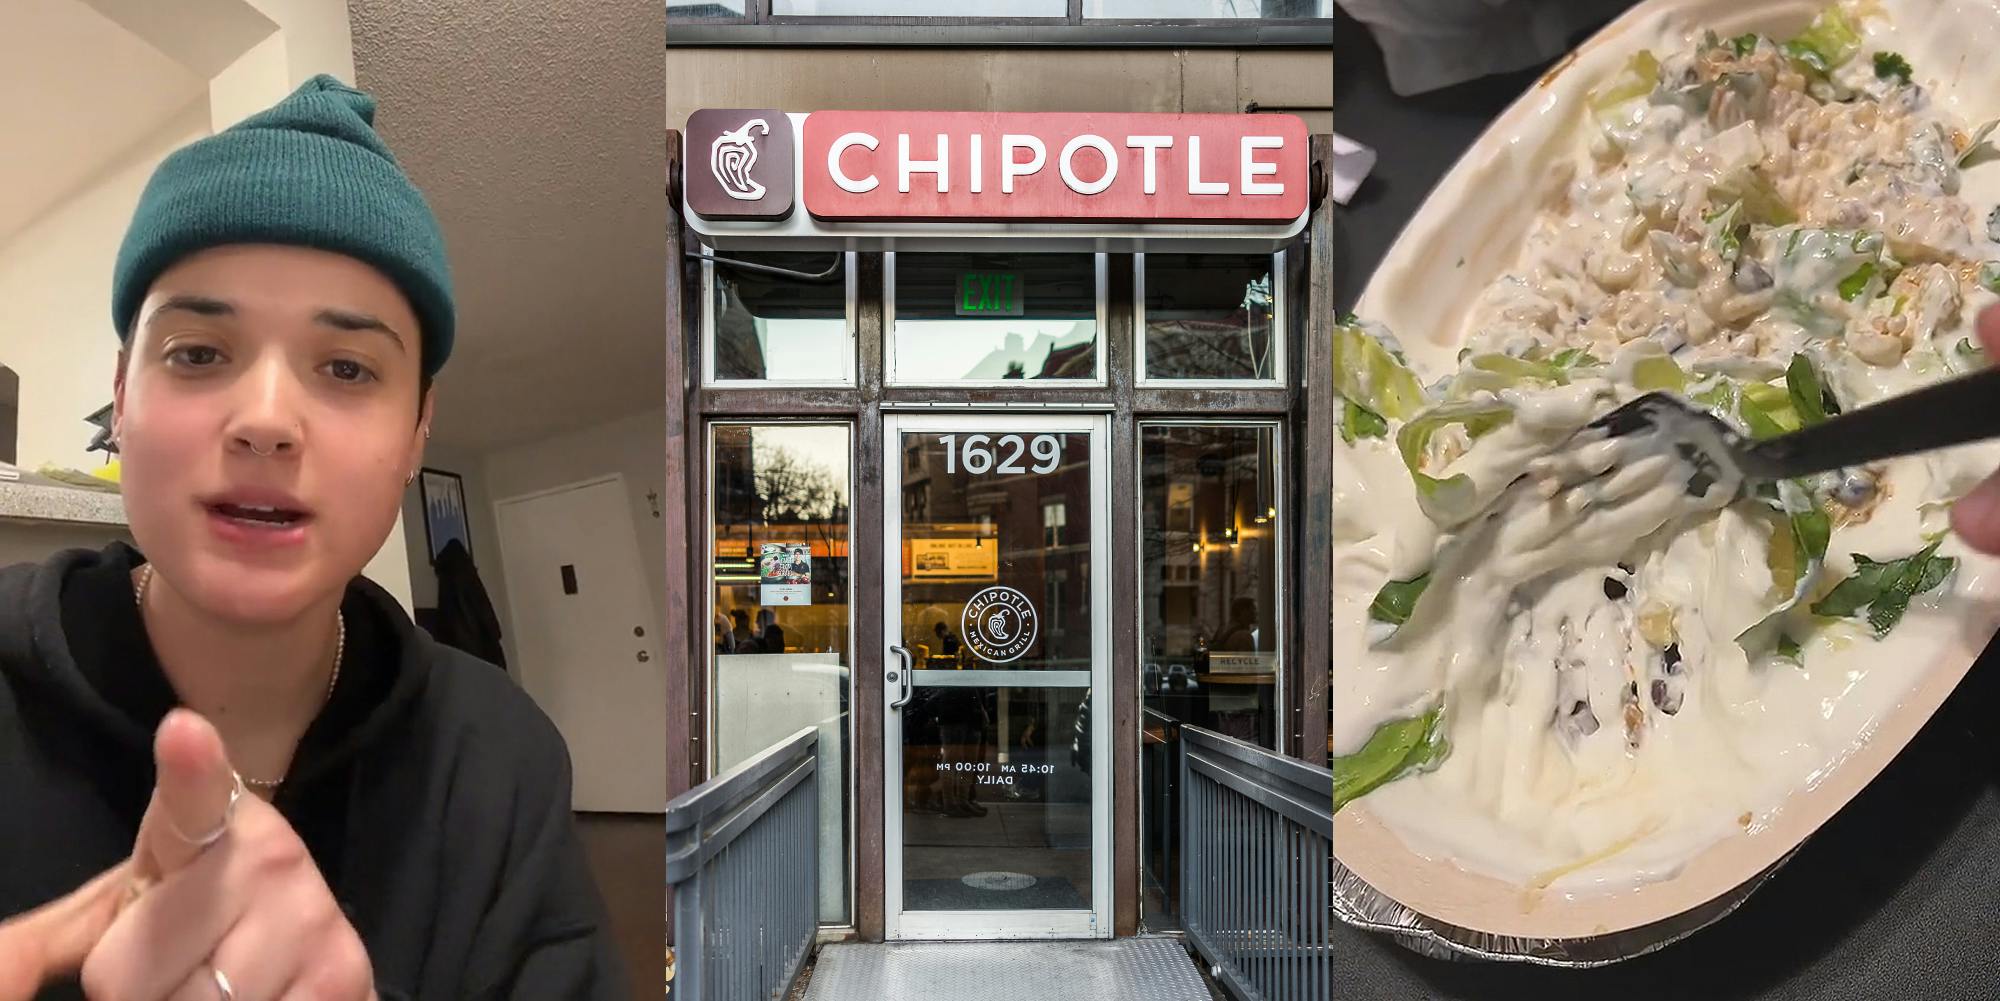 person speaking pointing to camera (l) Chipotle sign on building with glass door (c) Chipotle food in bowl (r)